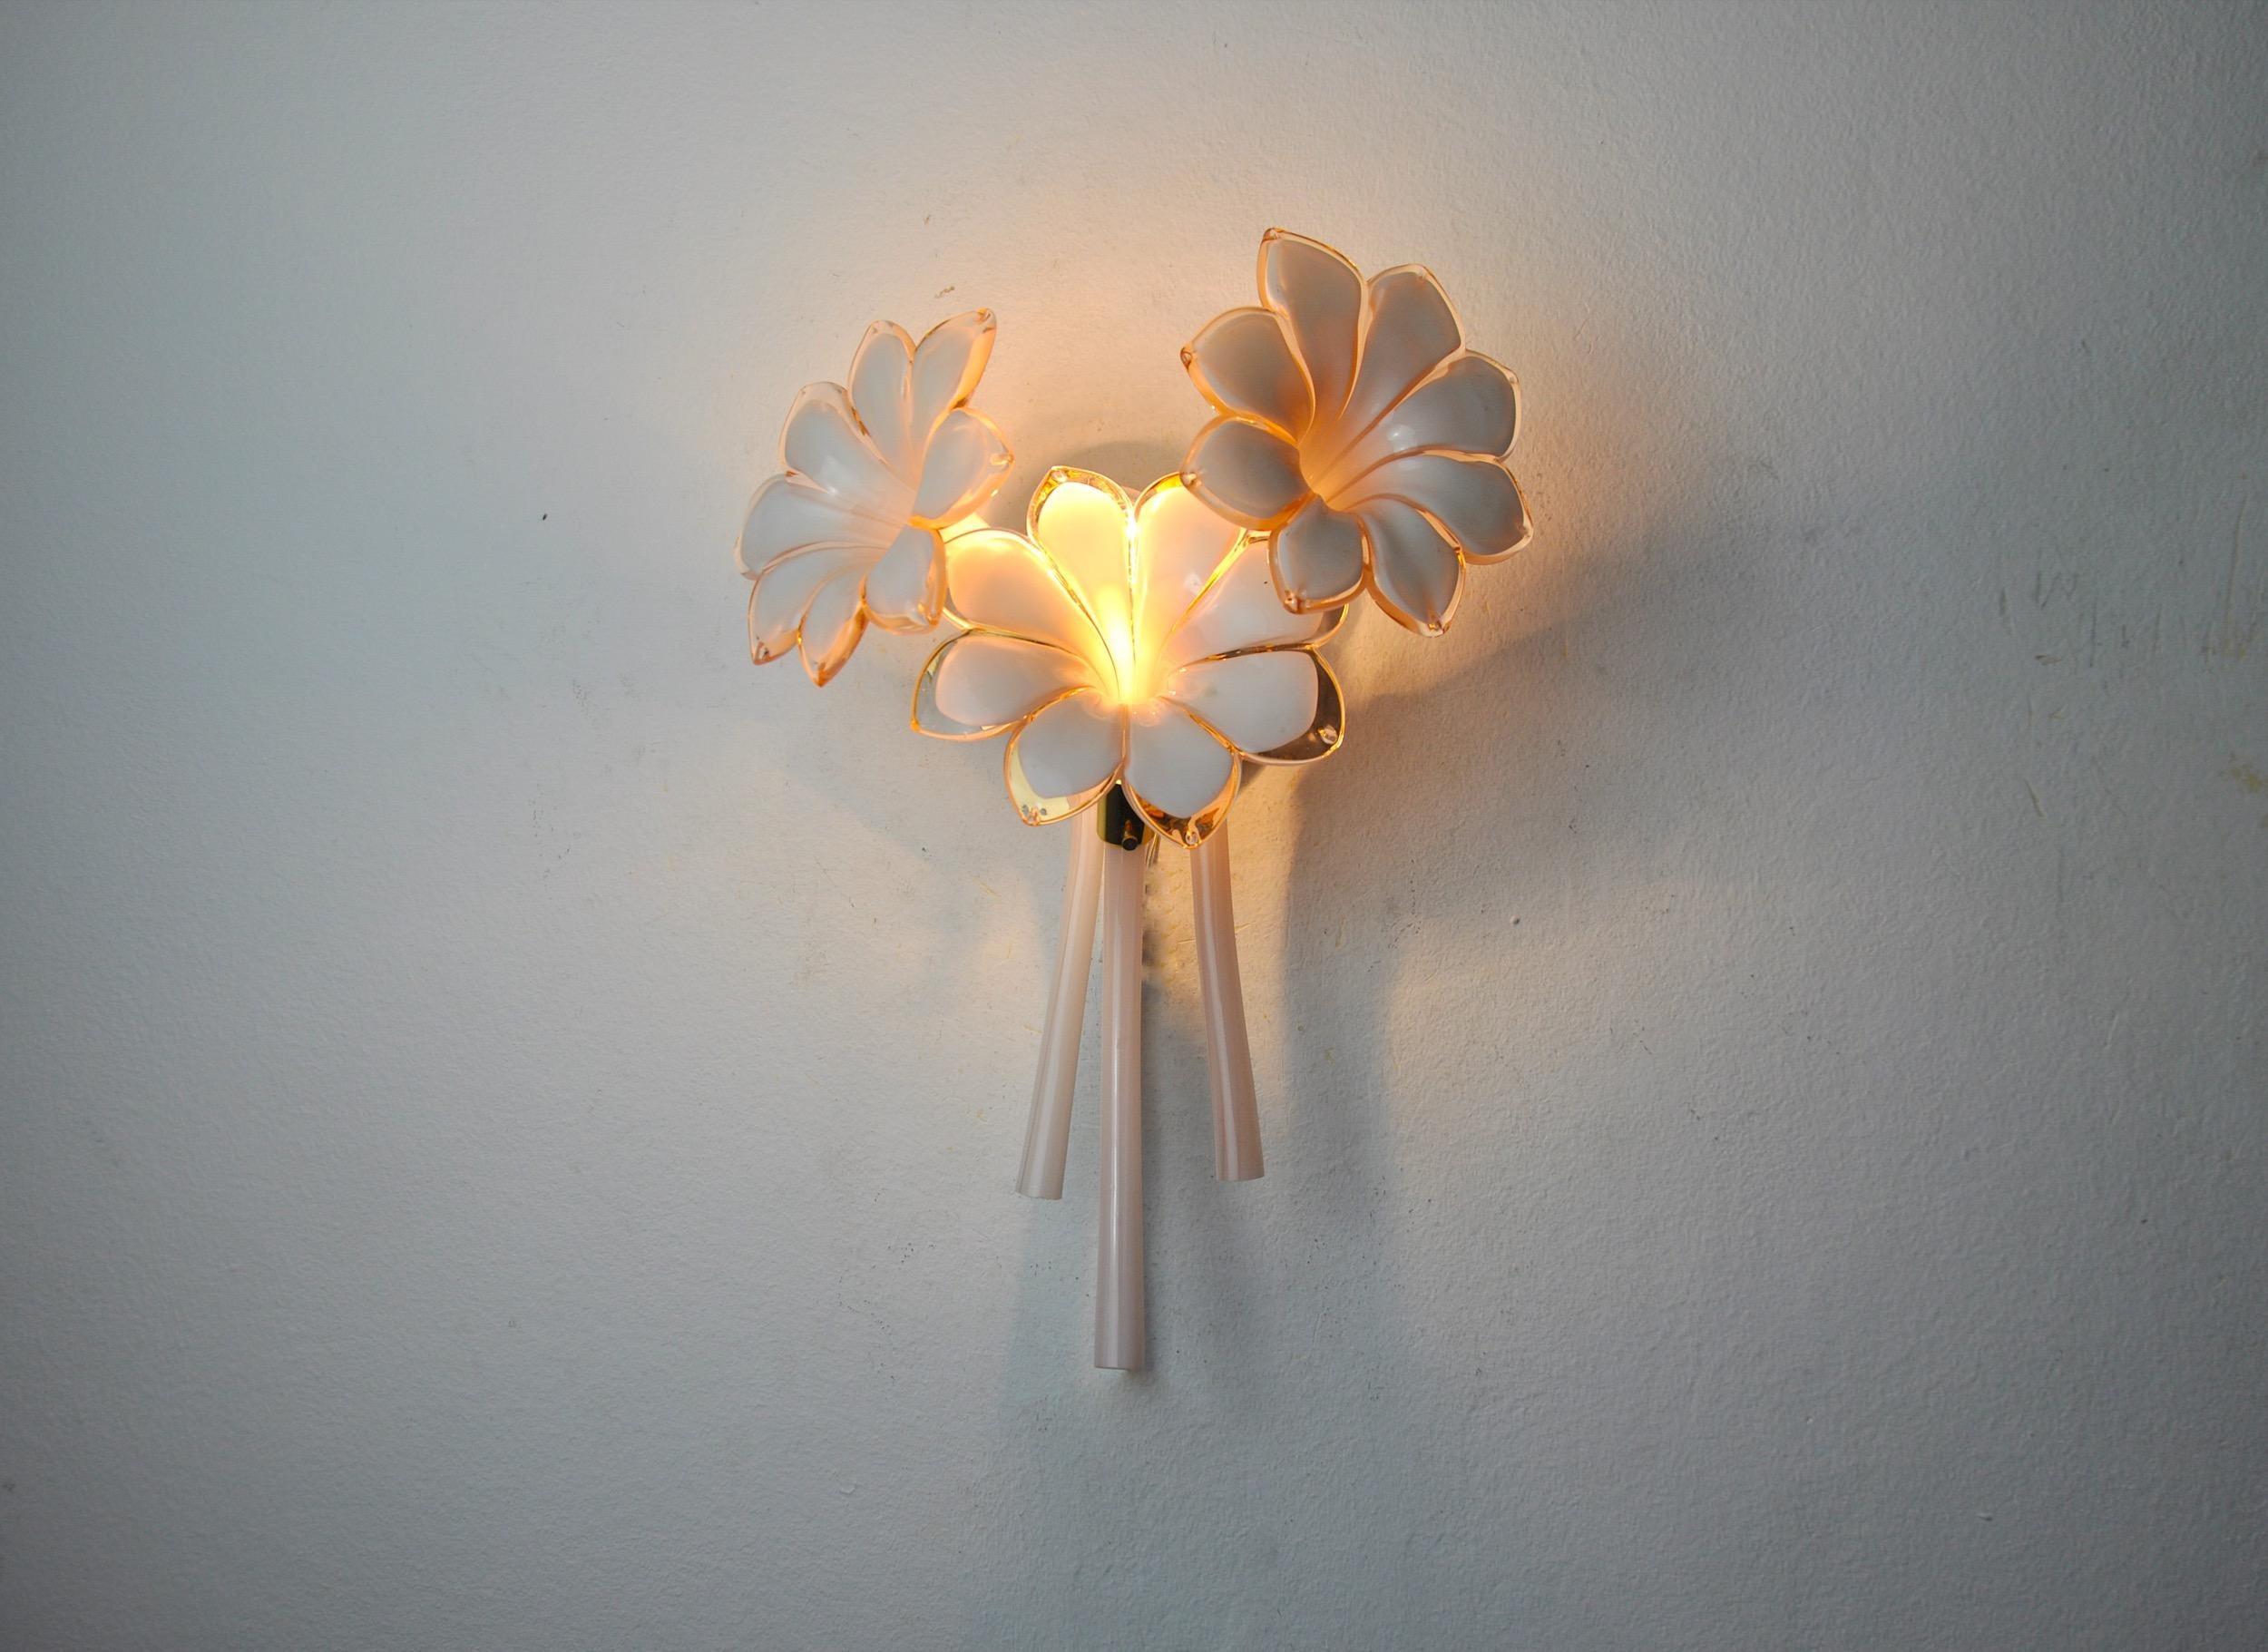 Superb and rare wall lamp fleurs-de-lys in murano glass, designed and produced in italy in the 1970s. Gilded metal structure composed of pink cut crystals in the shape of a fleur-de-lys, made by italian master glassmakers. Rare design object that